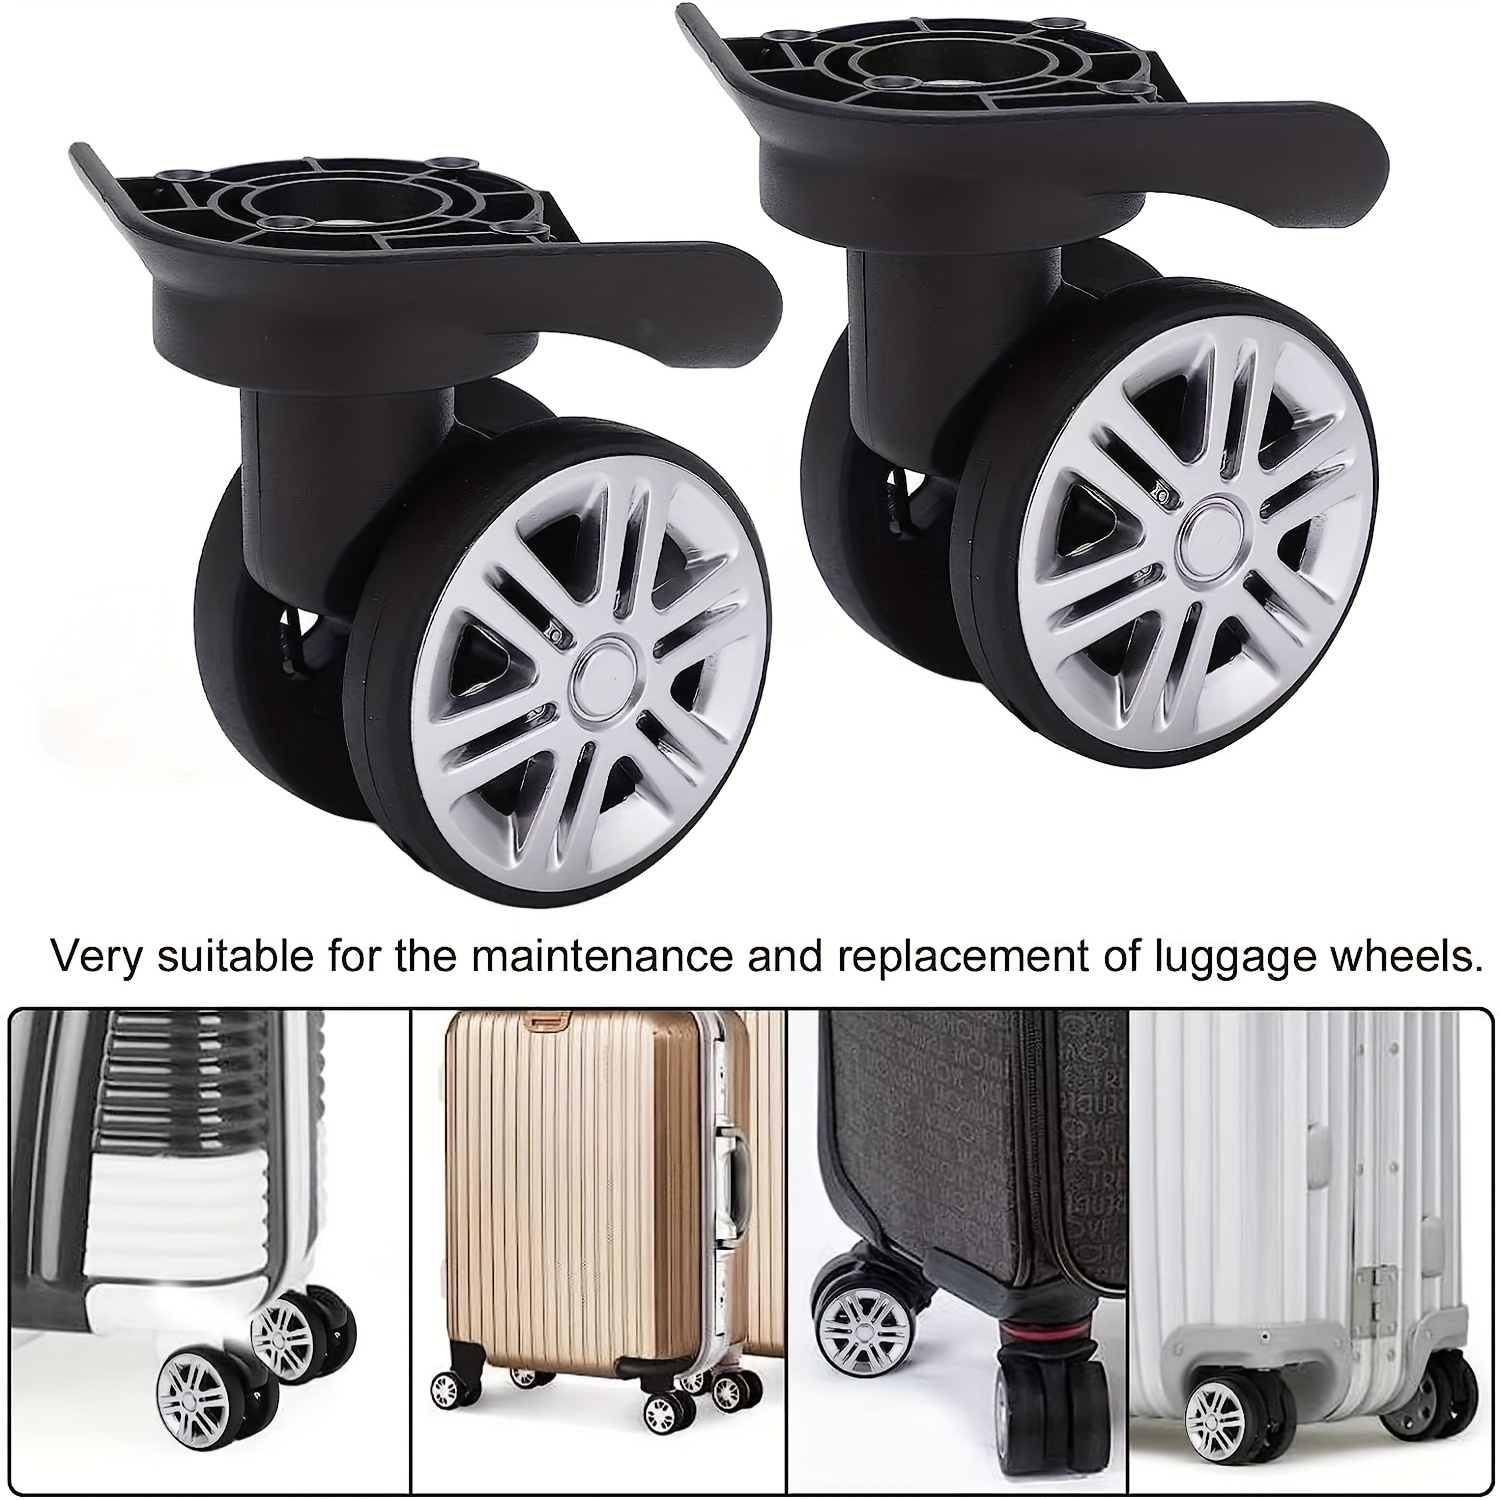 1 Pair Luggage Replacement Wheels, Luggage Wheels Replacement Double Row  Wheels, Box Bag Repair Accessories, Travel Case Wheels Replacement